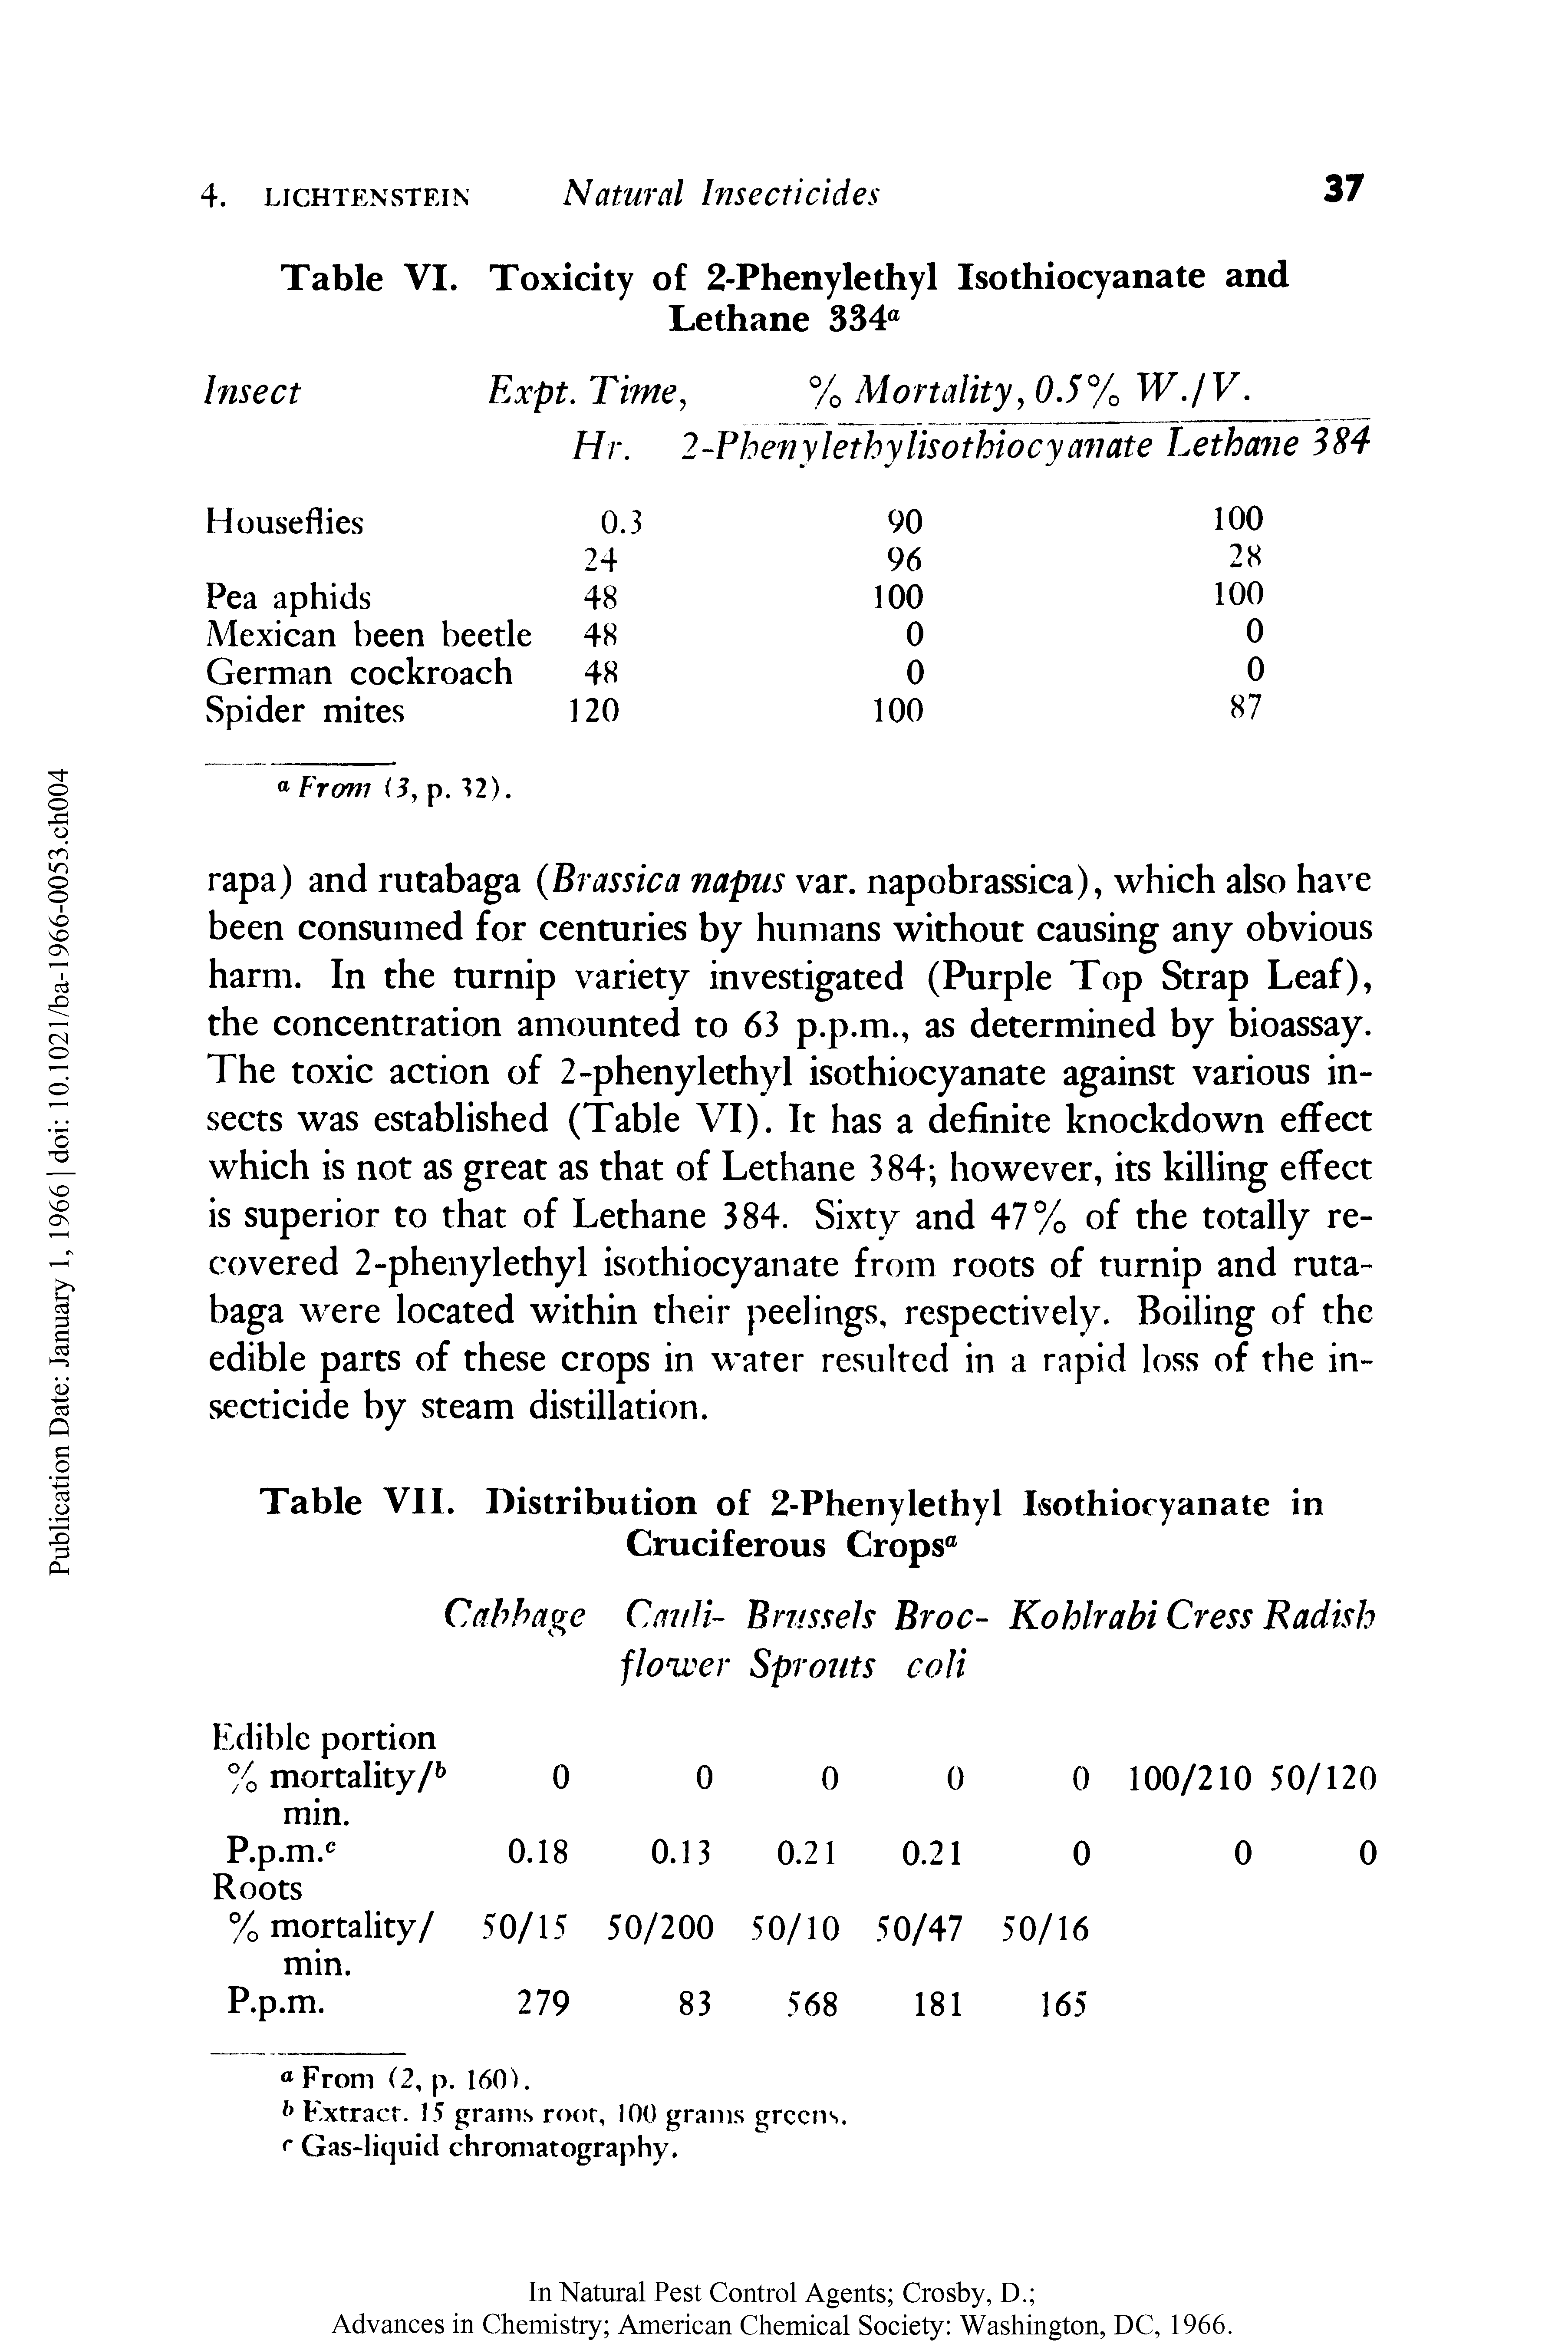 Table VII. Distribution of 2-Phenylethyl Isothioryanate in Cruciferous Crops ...